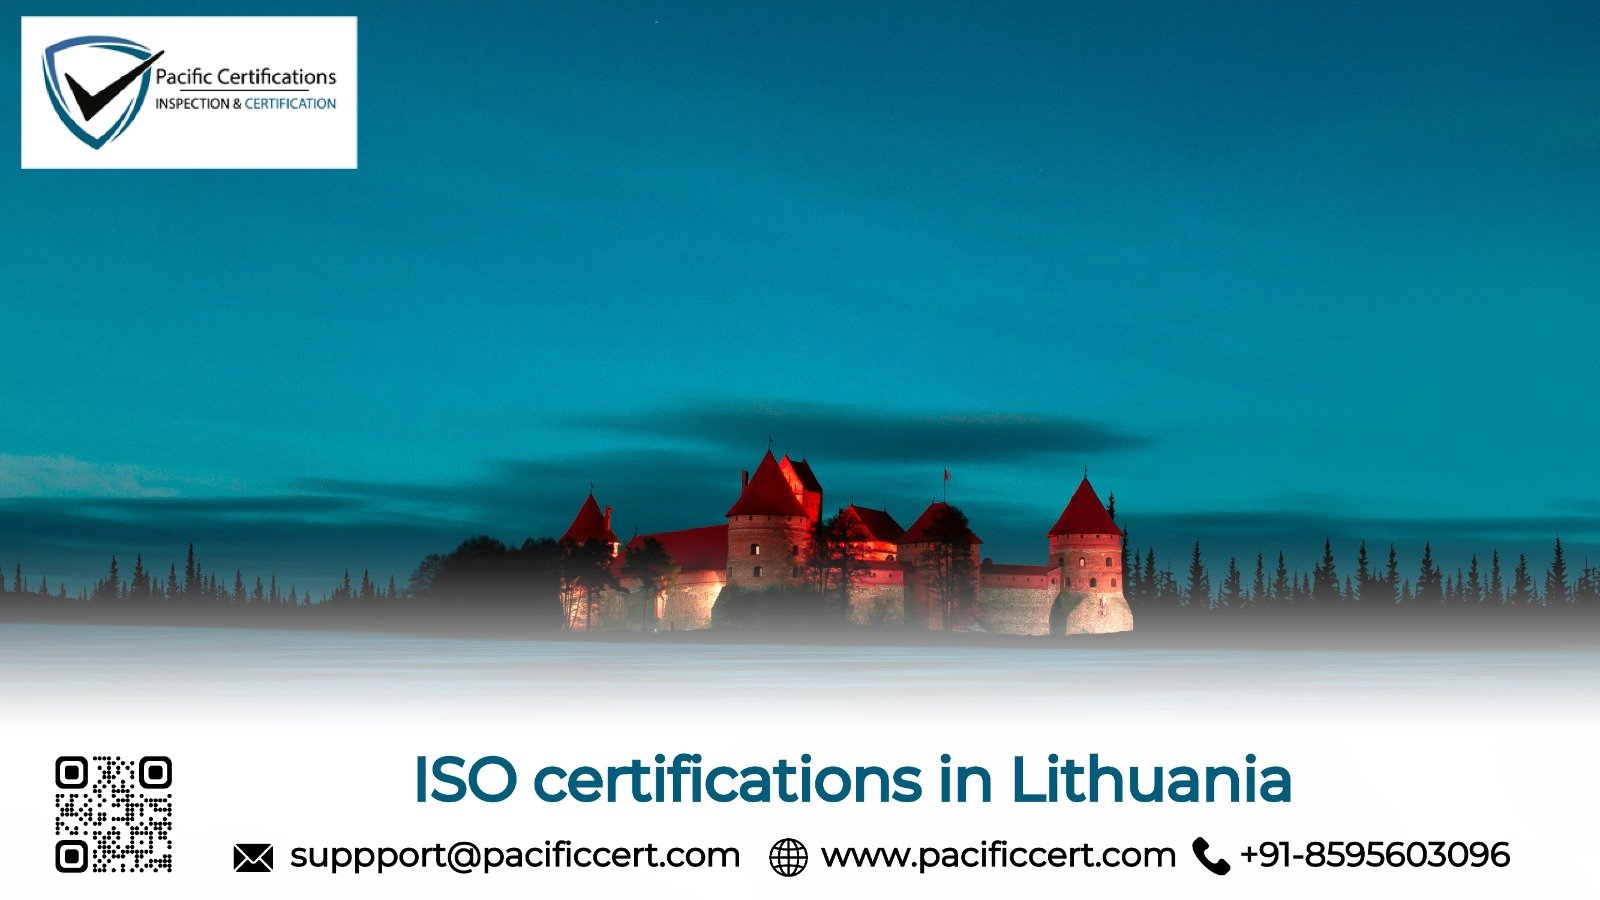 ISO Certifications in Lithuania and How Pacific Certifications can help | Pacific Certifications